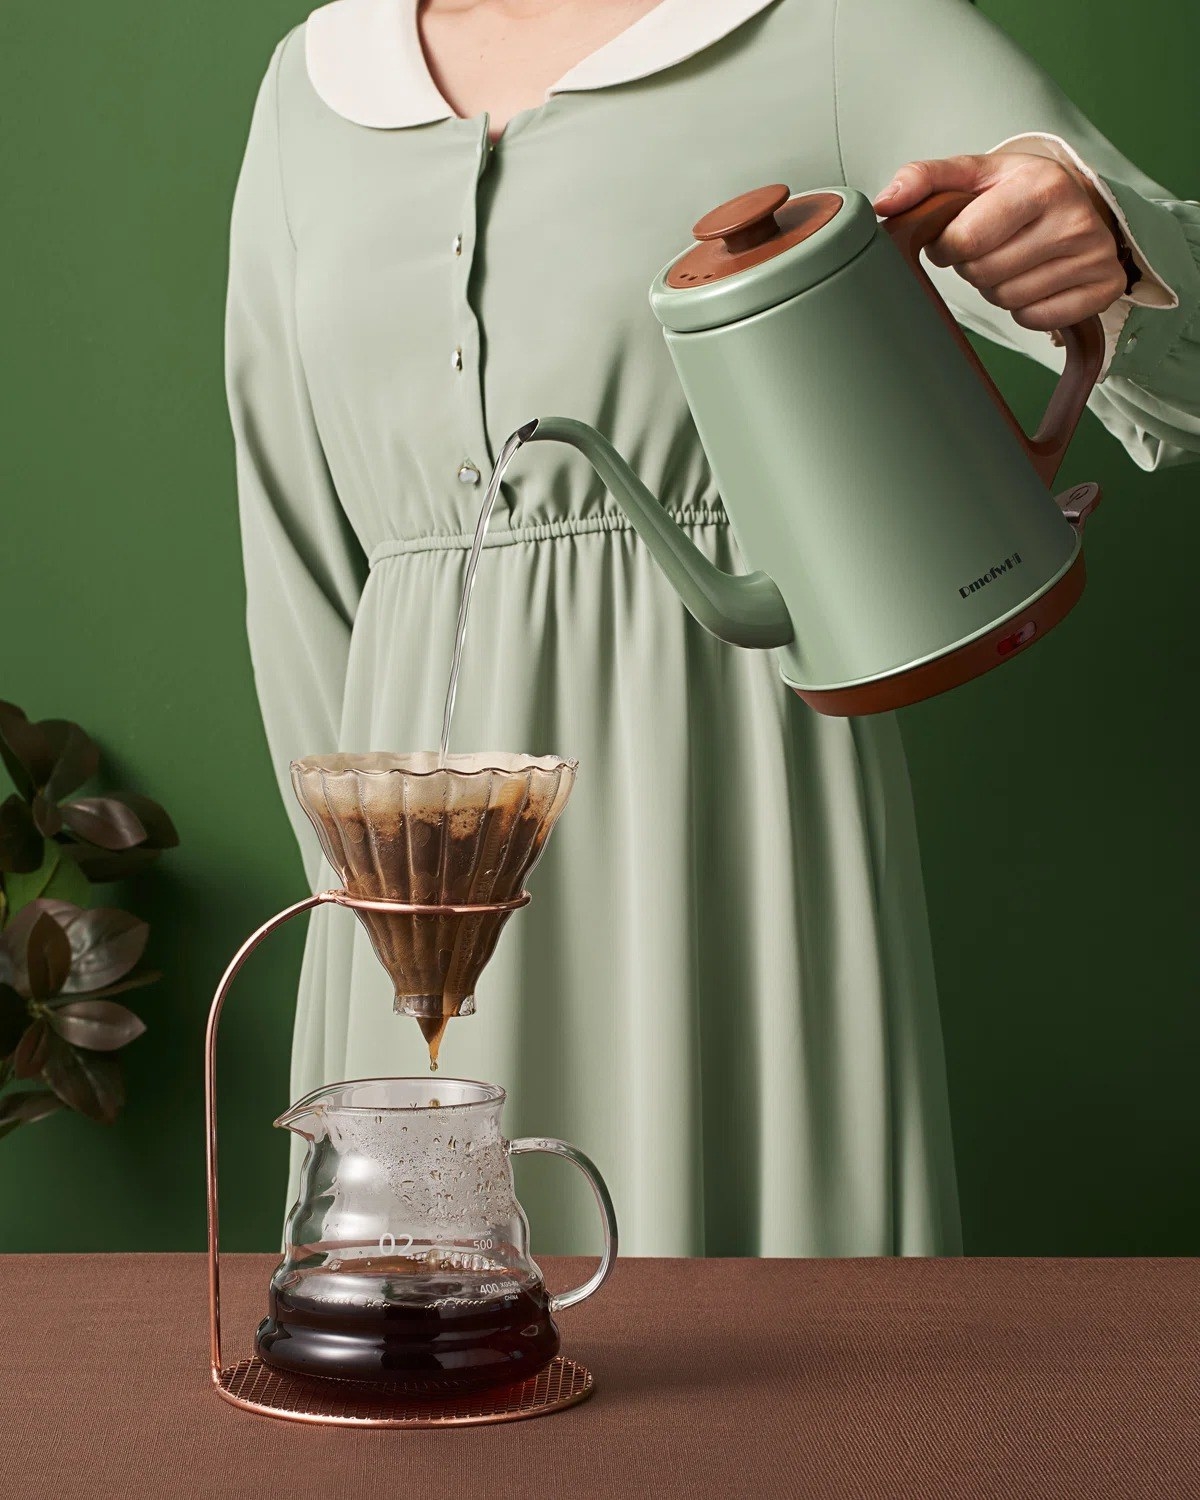 a model using the green kettle